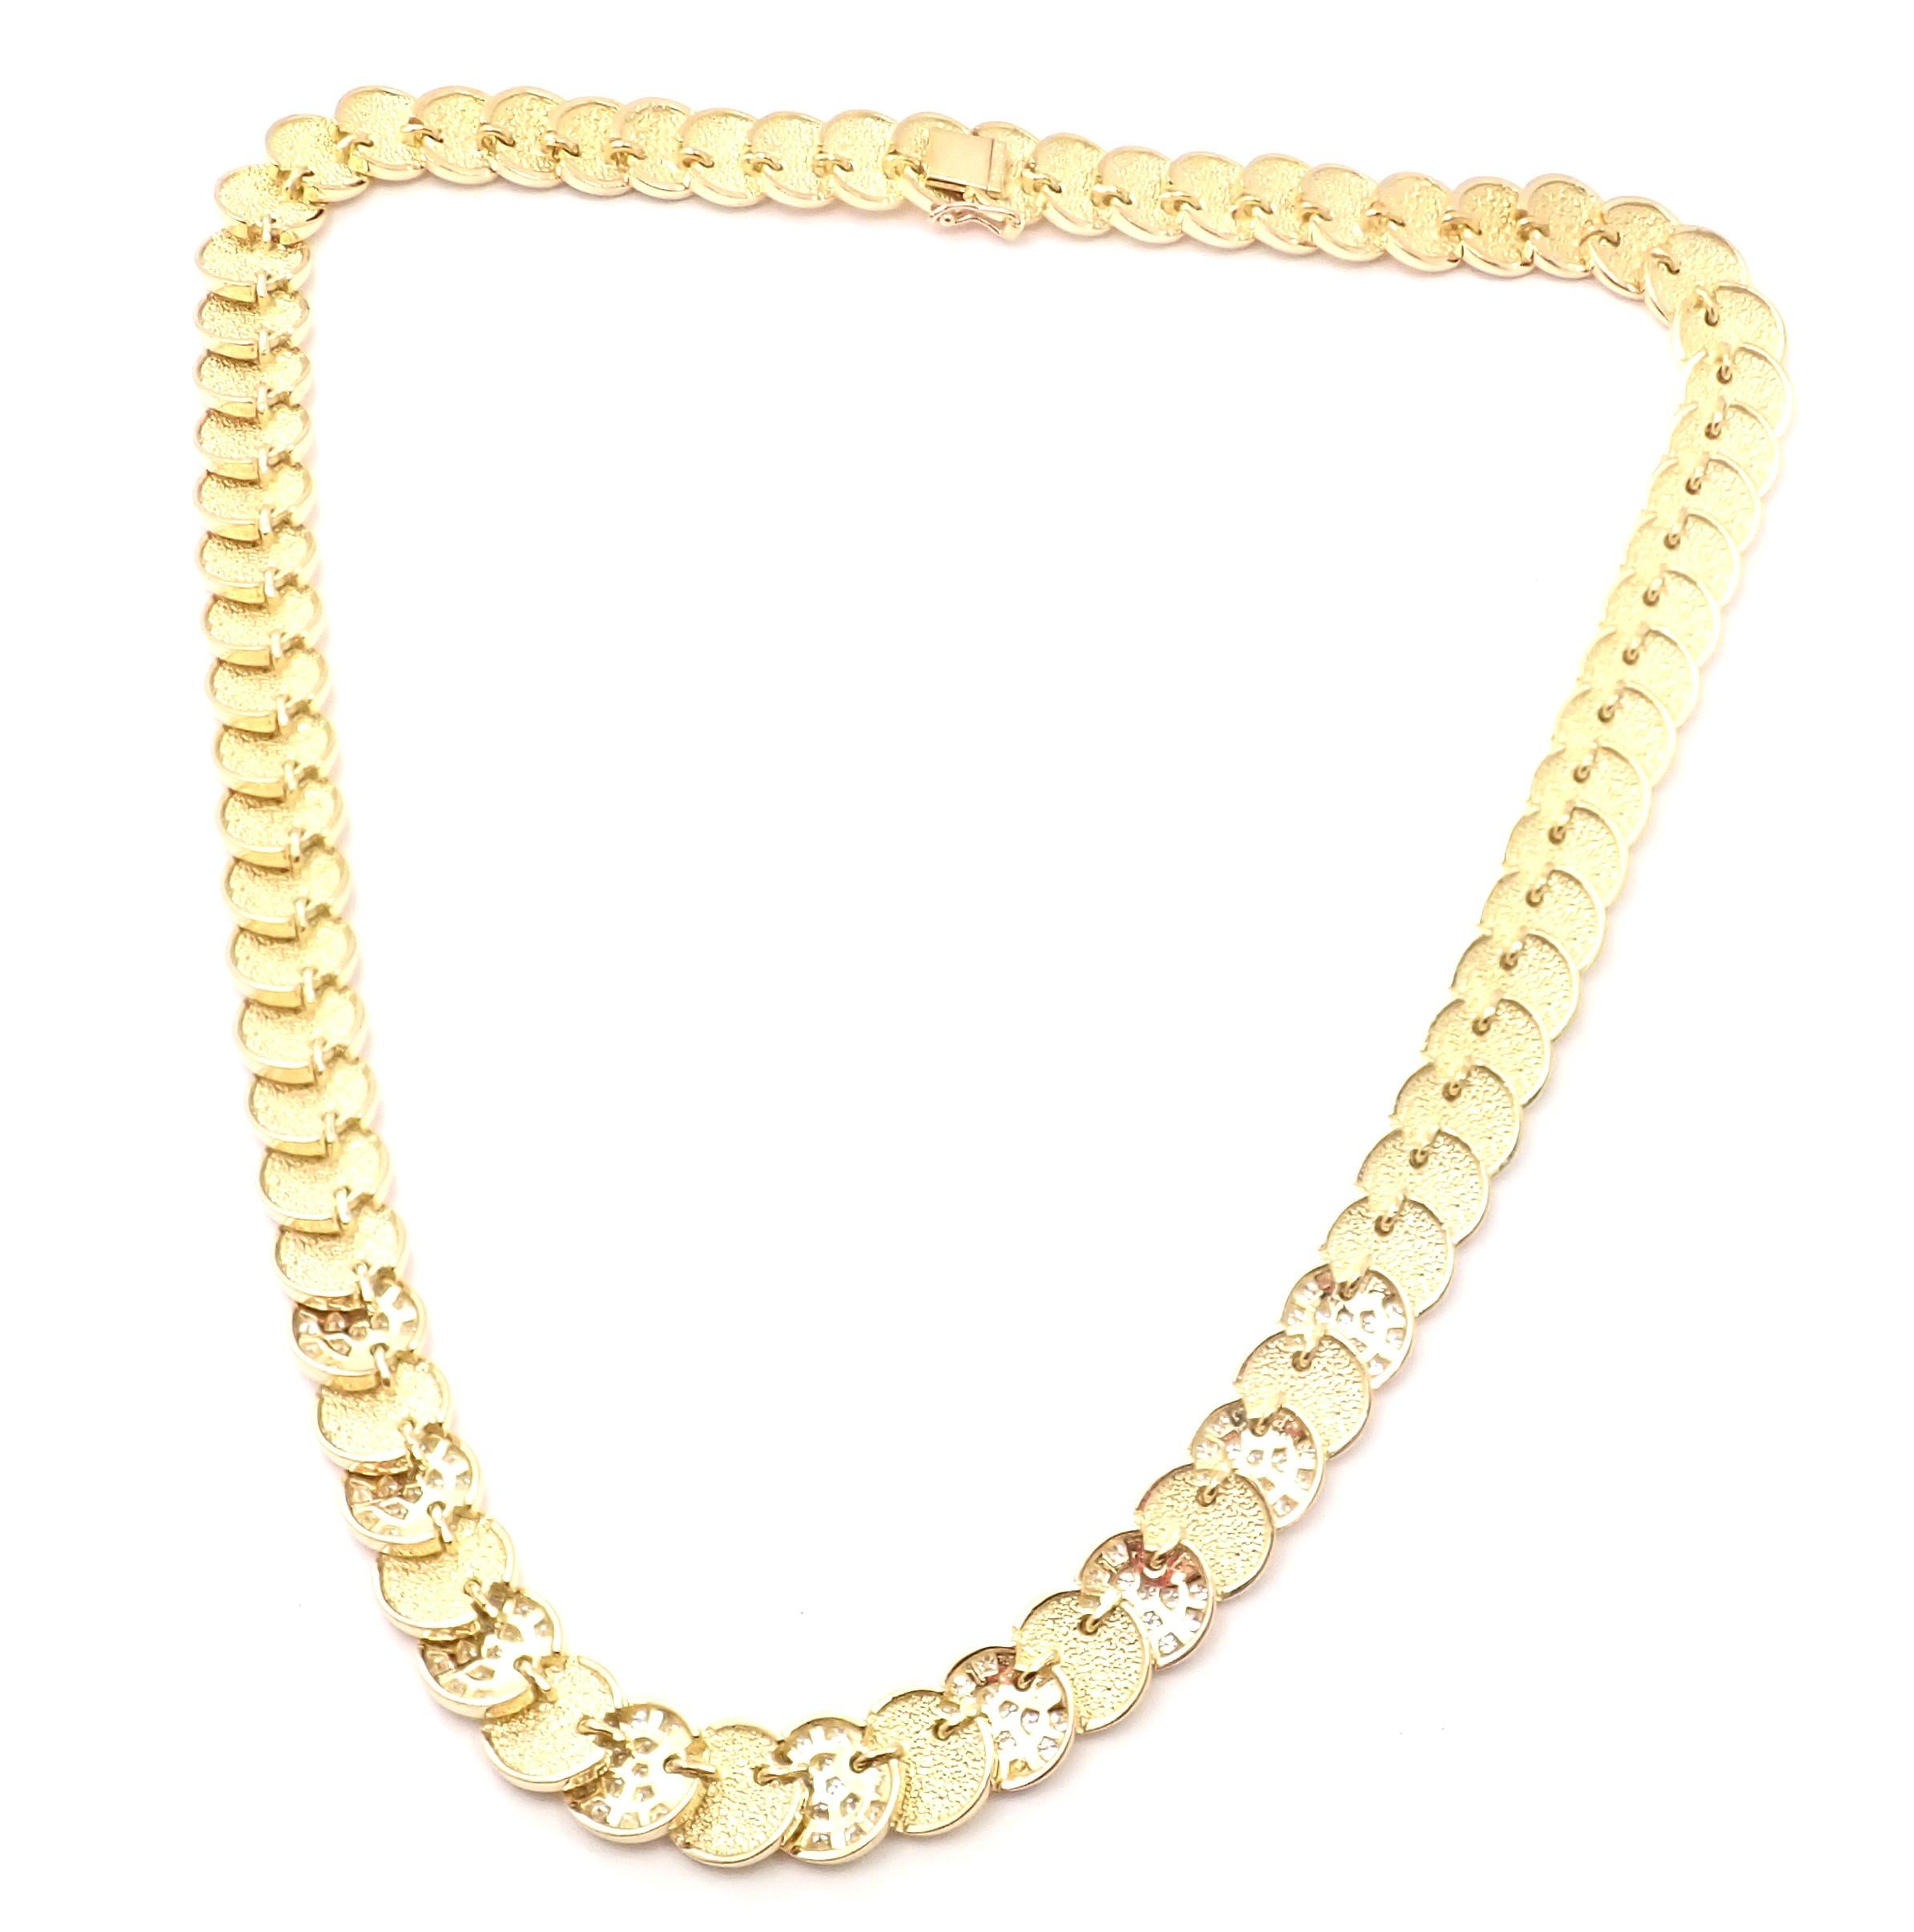 Vintage Van Cleef & Arpels Diamond and Yellow Gold Discs Necklace In Excellent Condition For Sale In Holland, PA